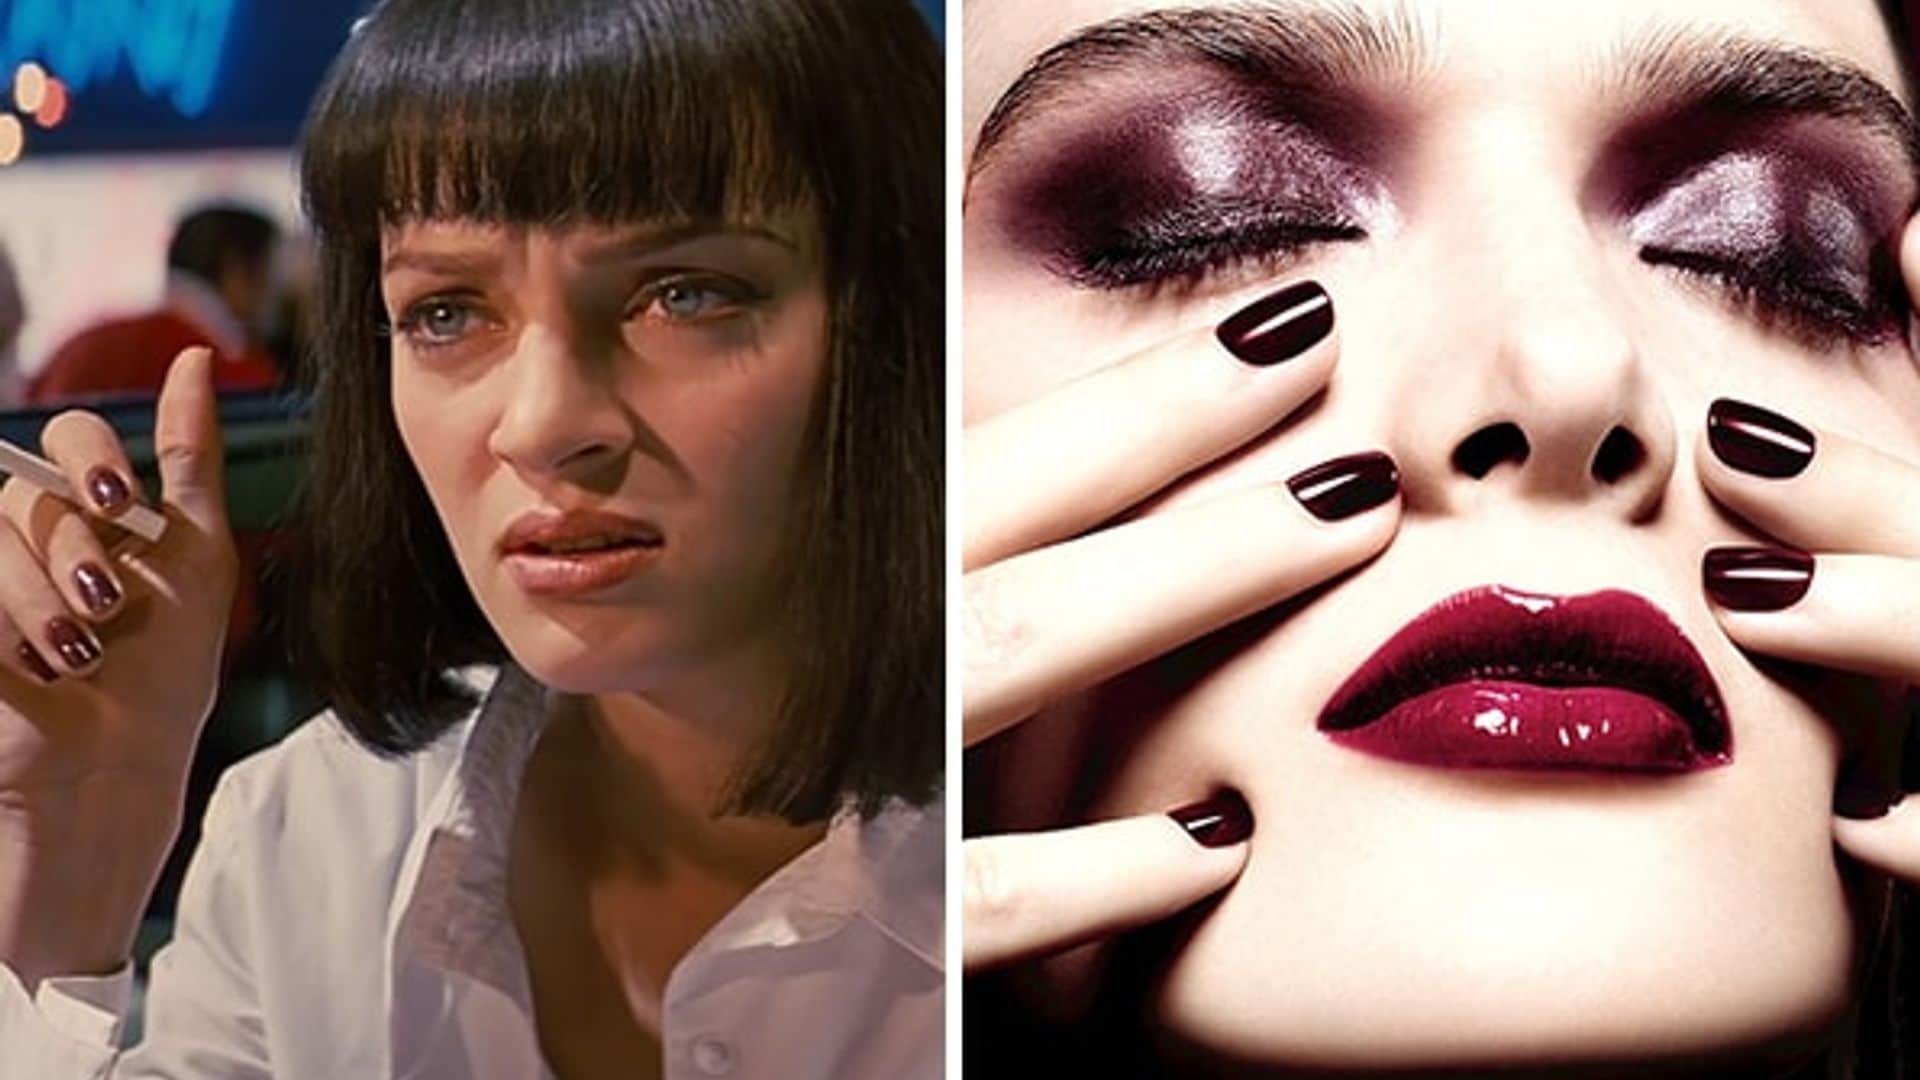 To mark the 20th anniversary of cult fave nail polish 'Vamp', famously captured on film in 1995's 'Pulp Fiction', Chanel has launched a full holiday collection celebrating the shade.
<br>
Photo: Chanel